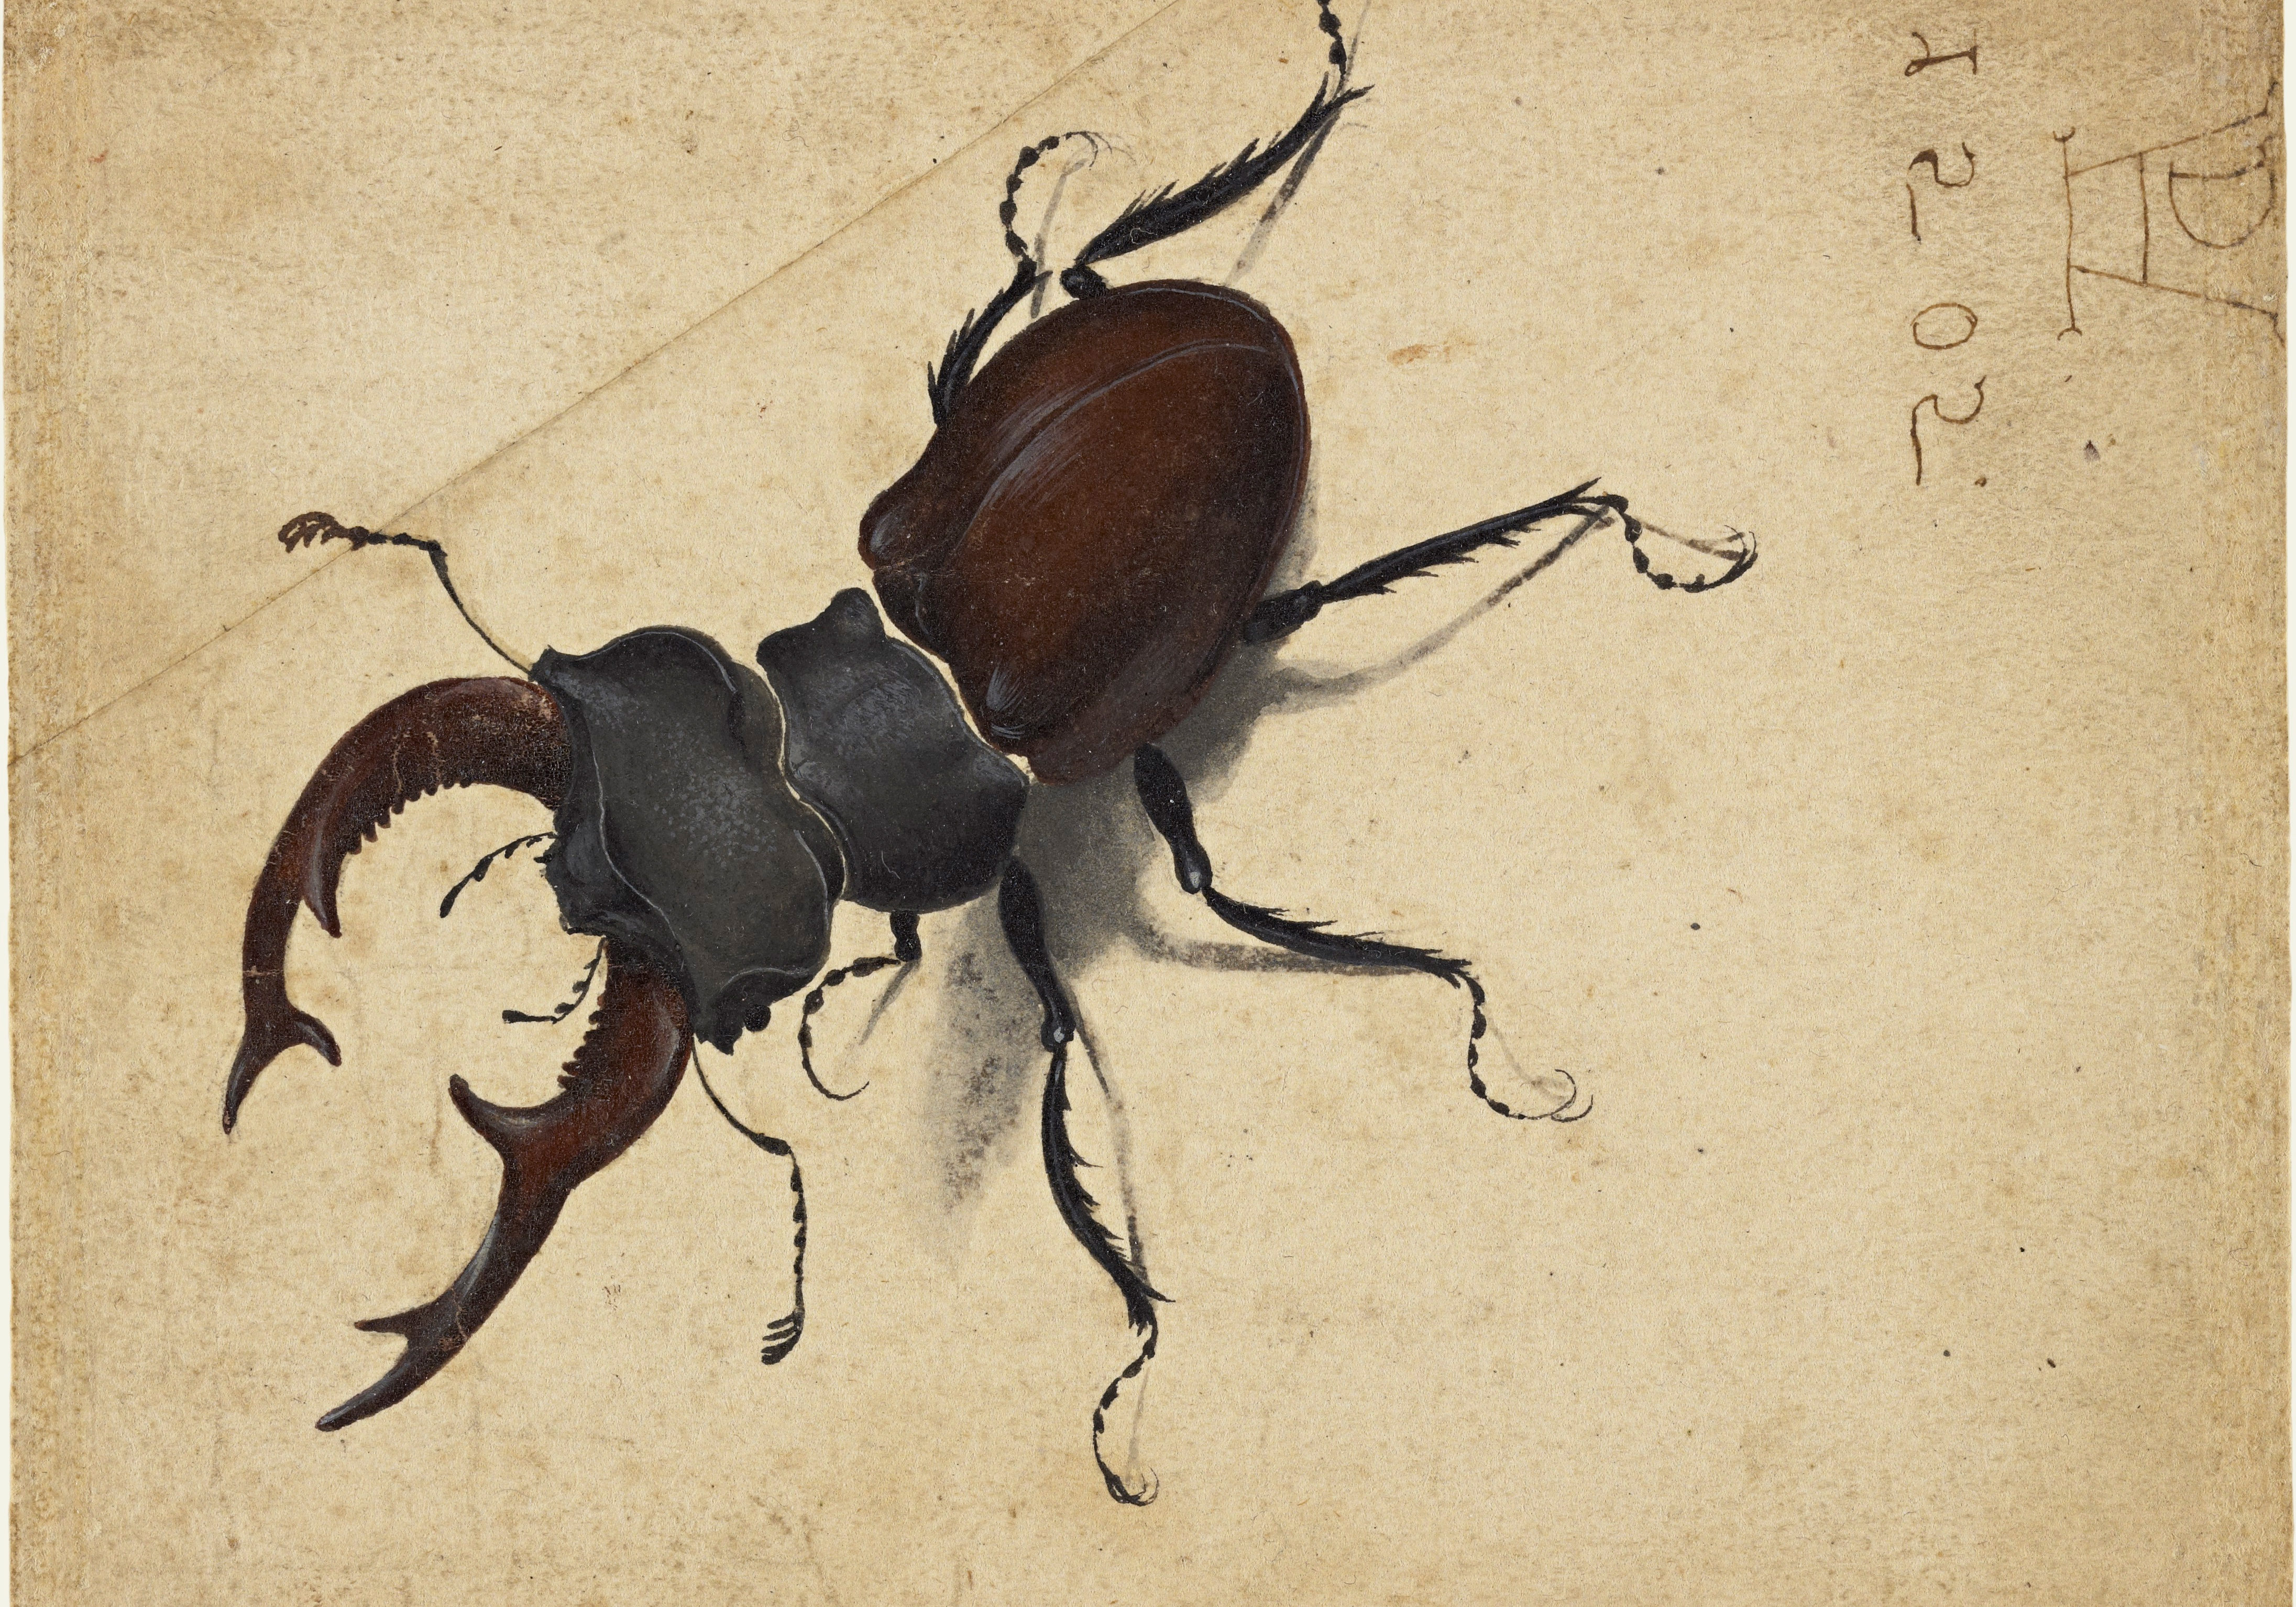 detailed drawing of a beetle on parchment.